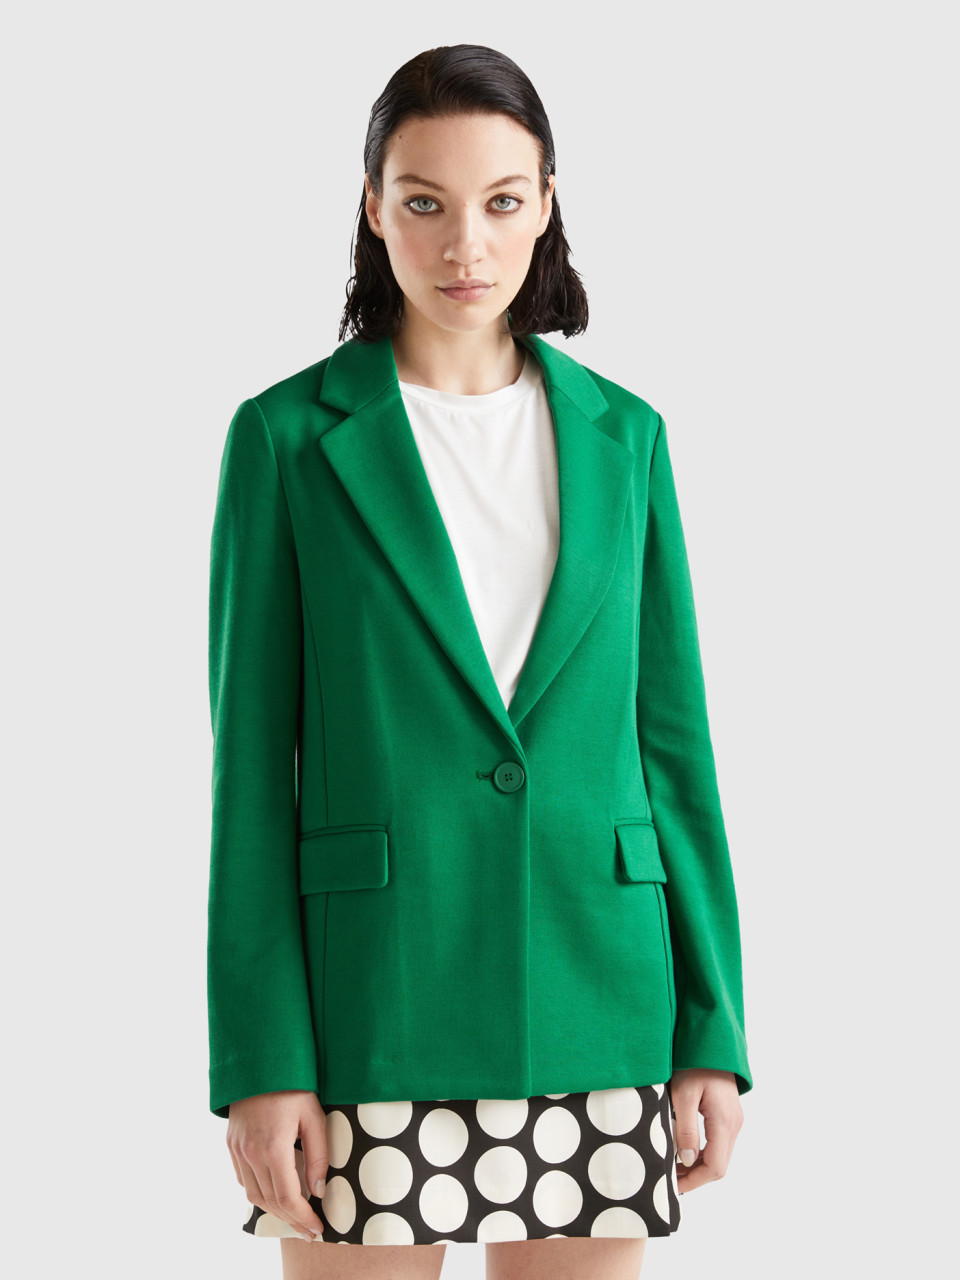 Benetton, Fitted Blazer With Pockets, Green, Women